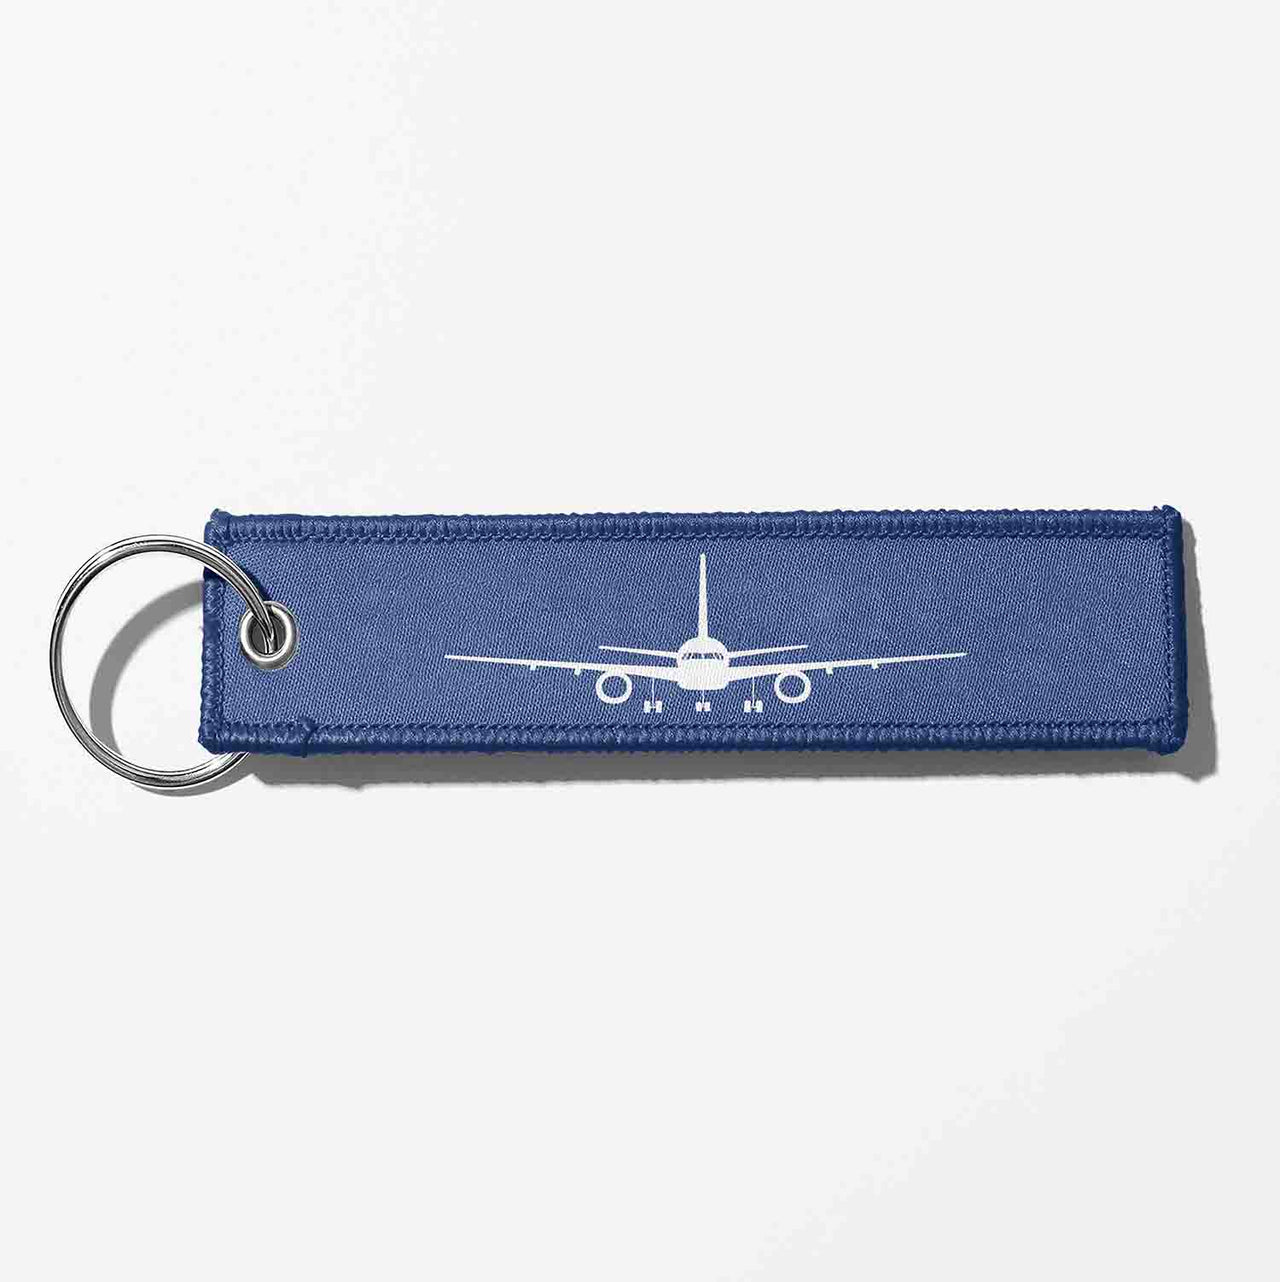 Boeing 757 Silhouette Designed Key Chains